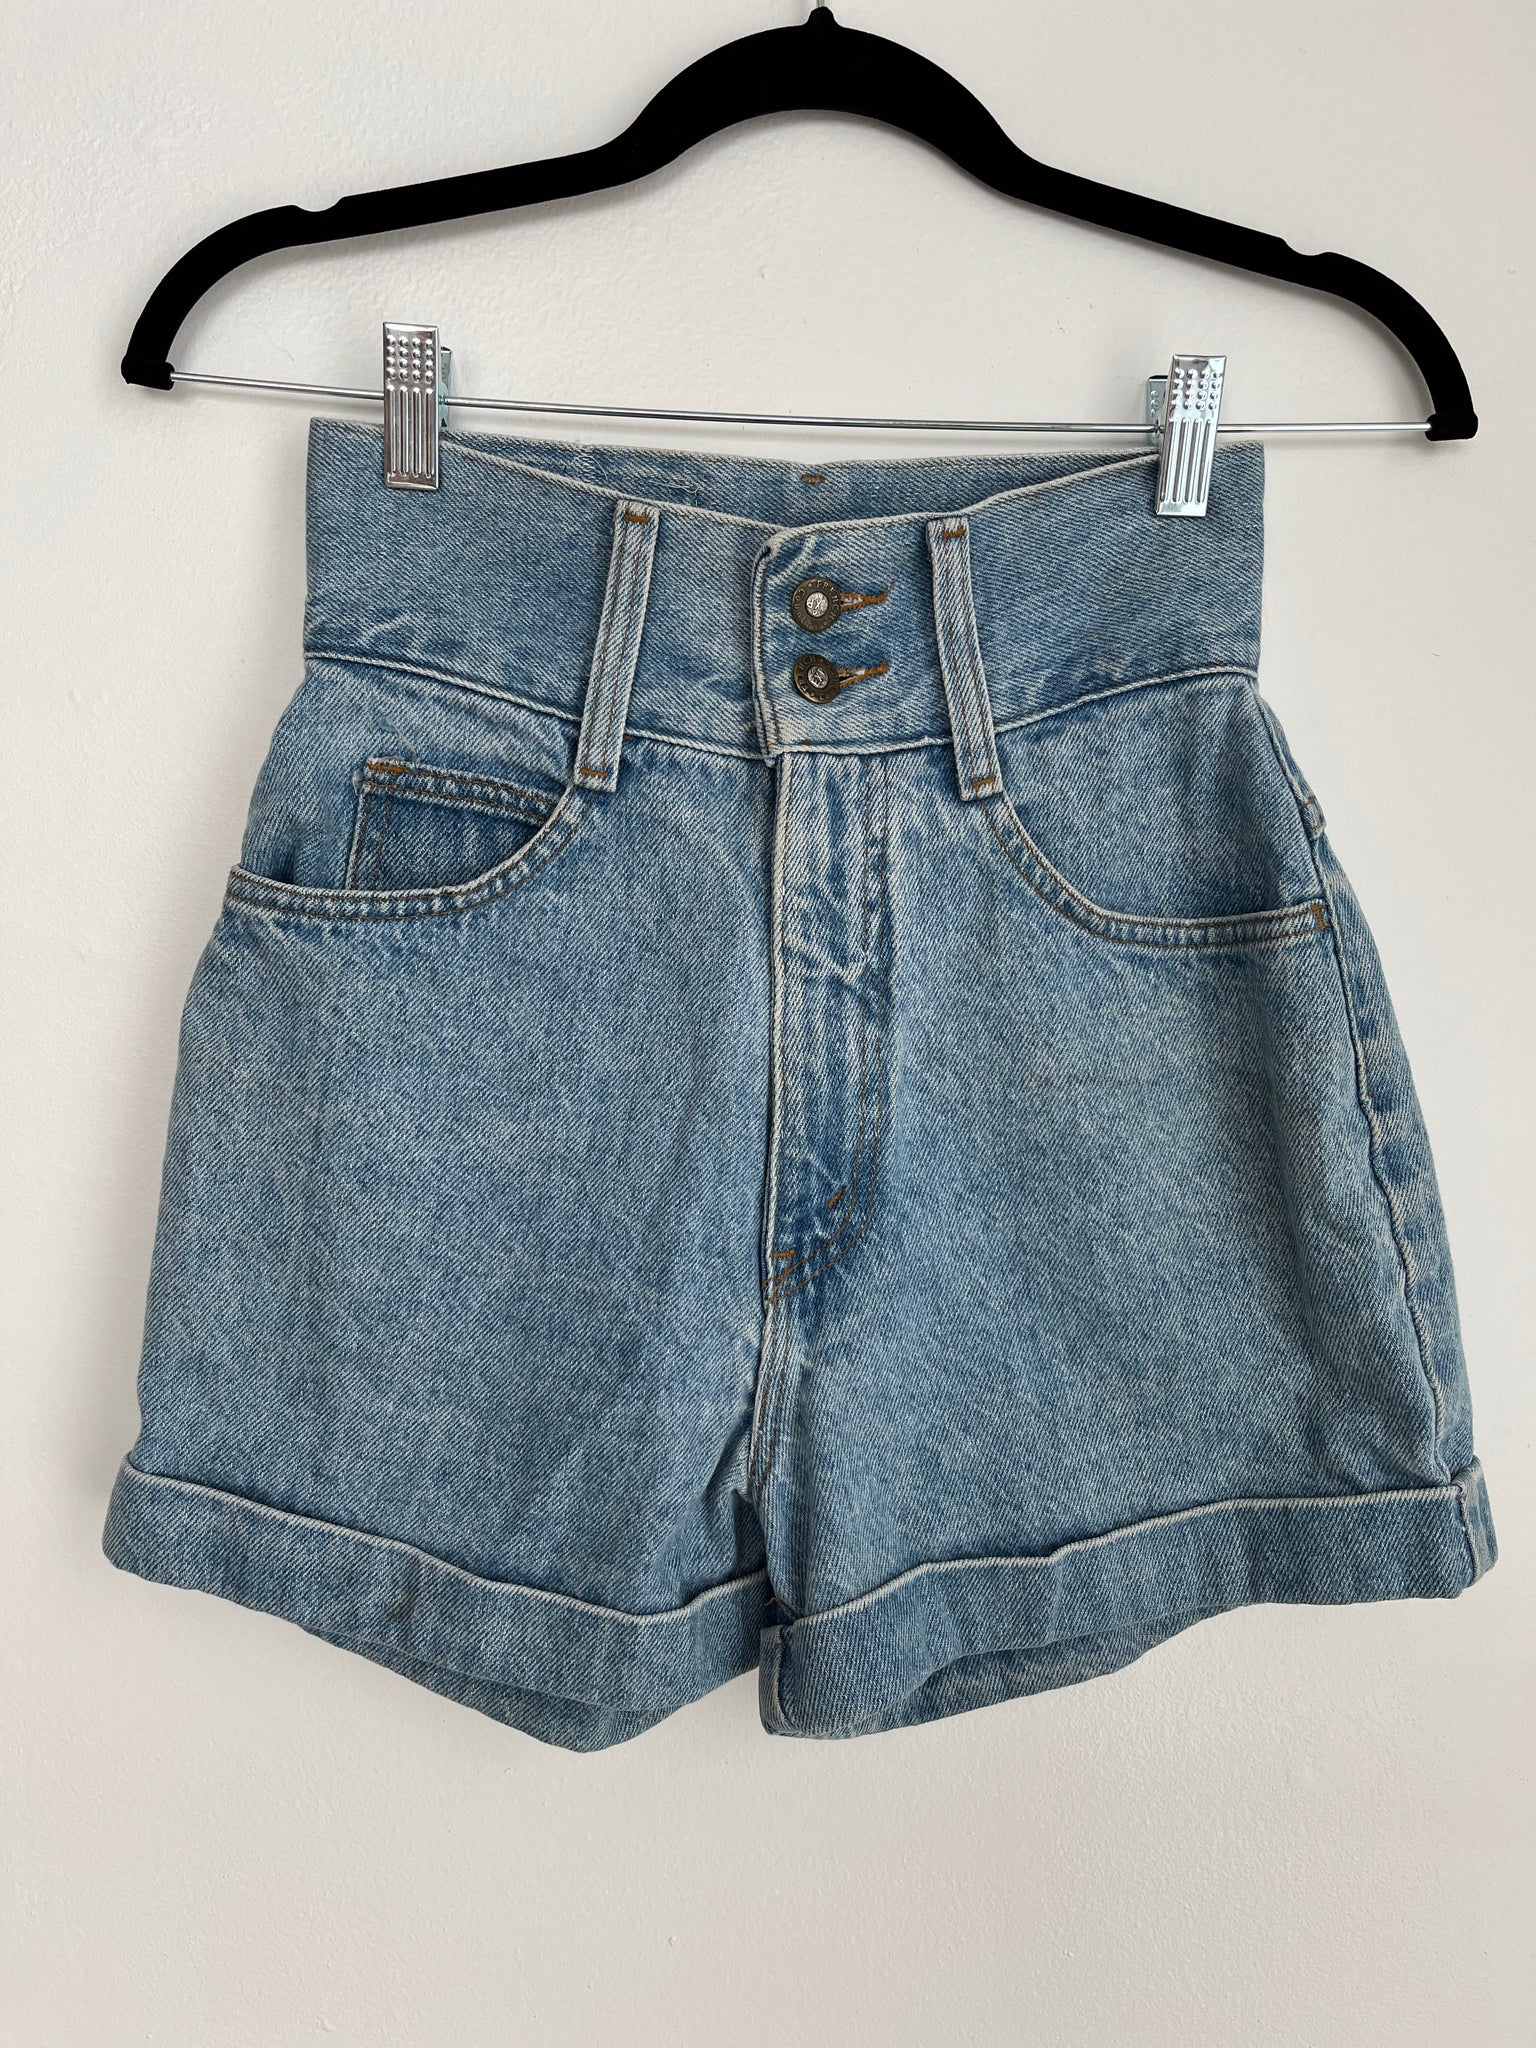 1990s SHORTS- DENIM-EXP French country